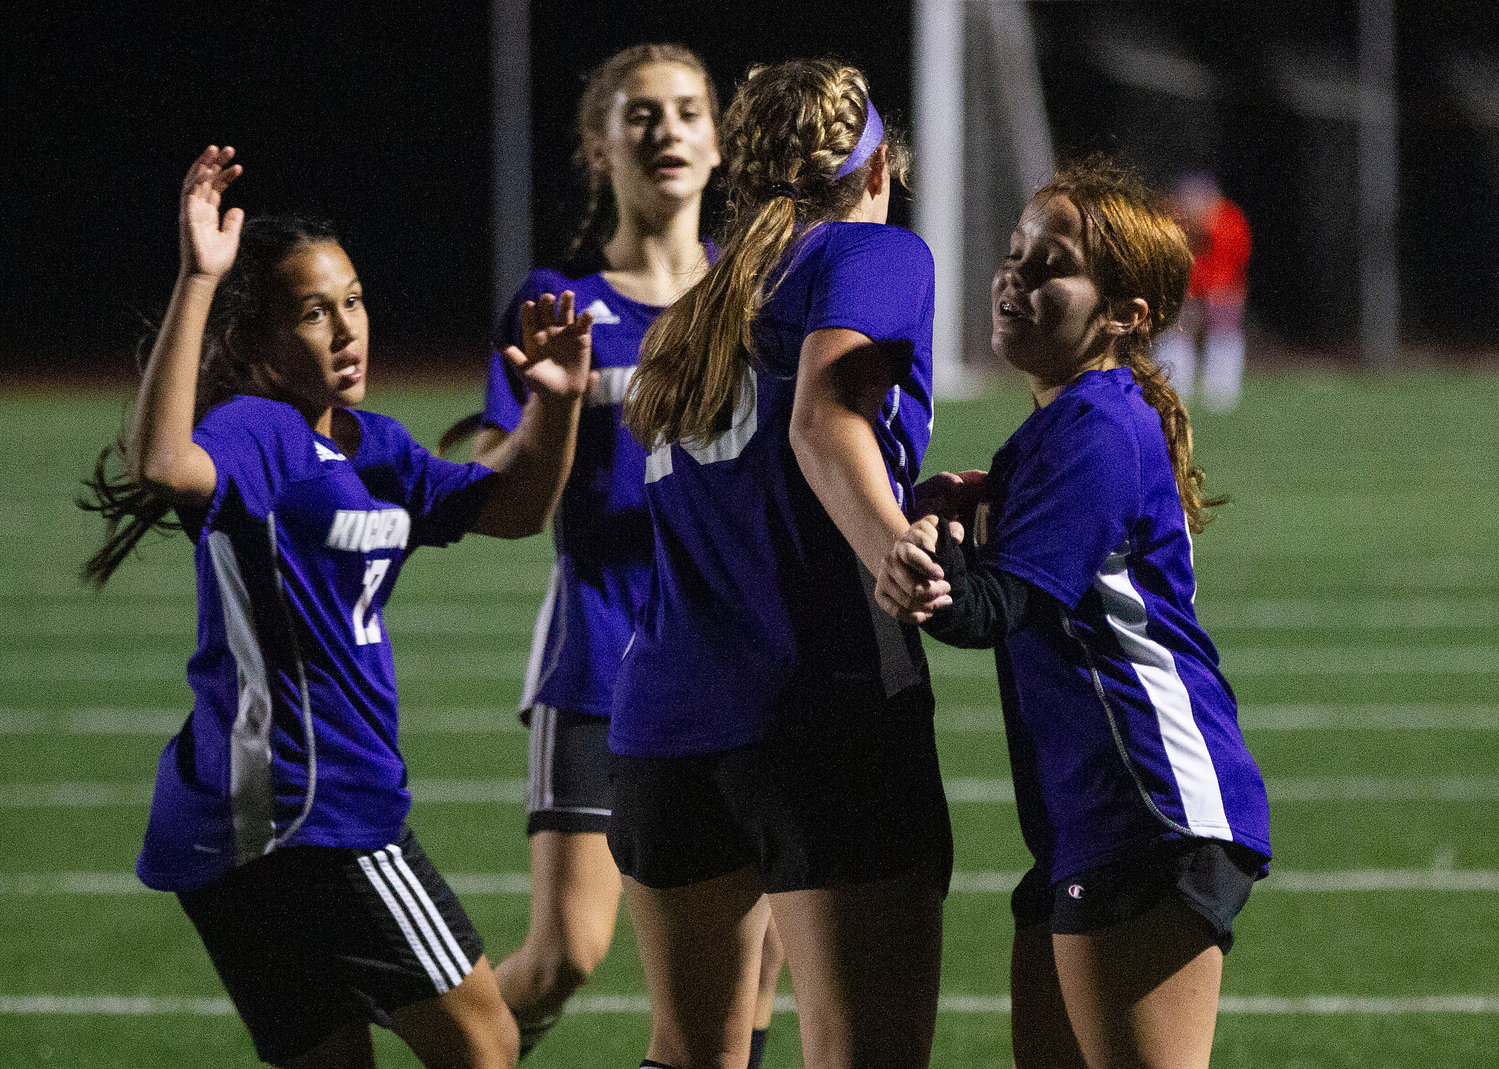 Thalia Adkins (left), Angela Pirri (right) and another teammate celebrate with Sara Nencka after she scored an insurance goal in the second half.